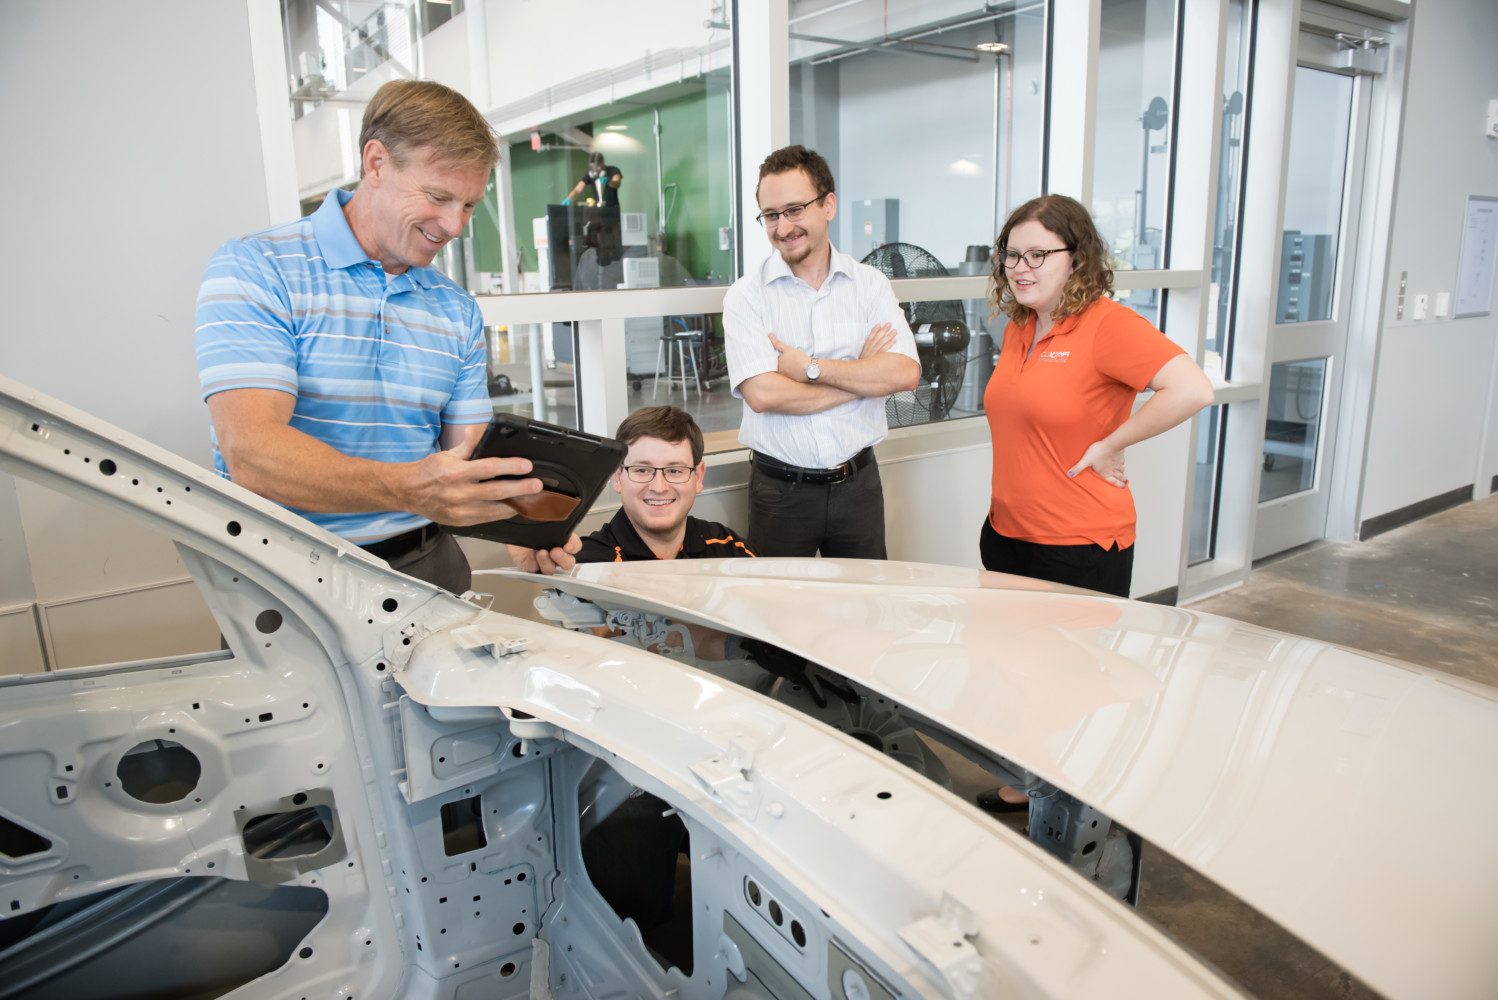 Laine Mears, far left, works with students in the Clemson Vehicle Assembly Center.